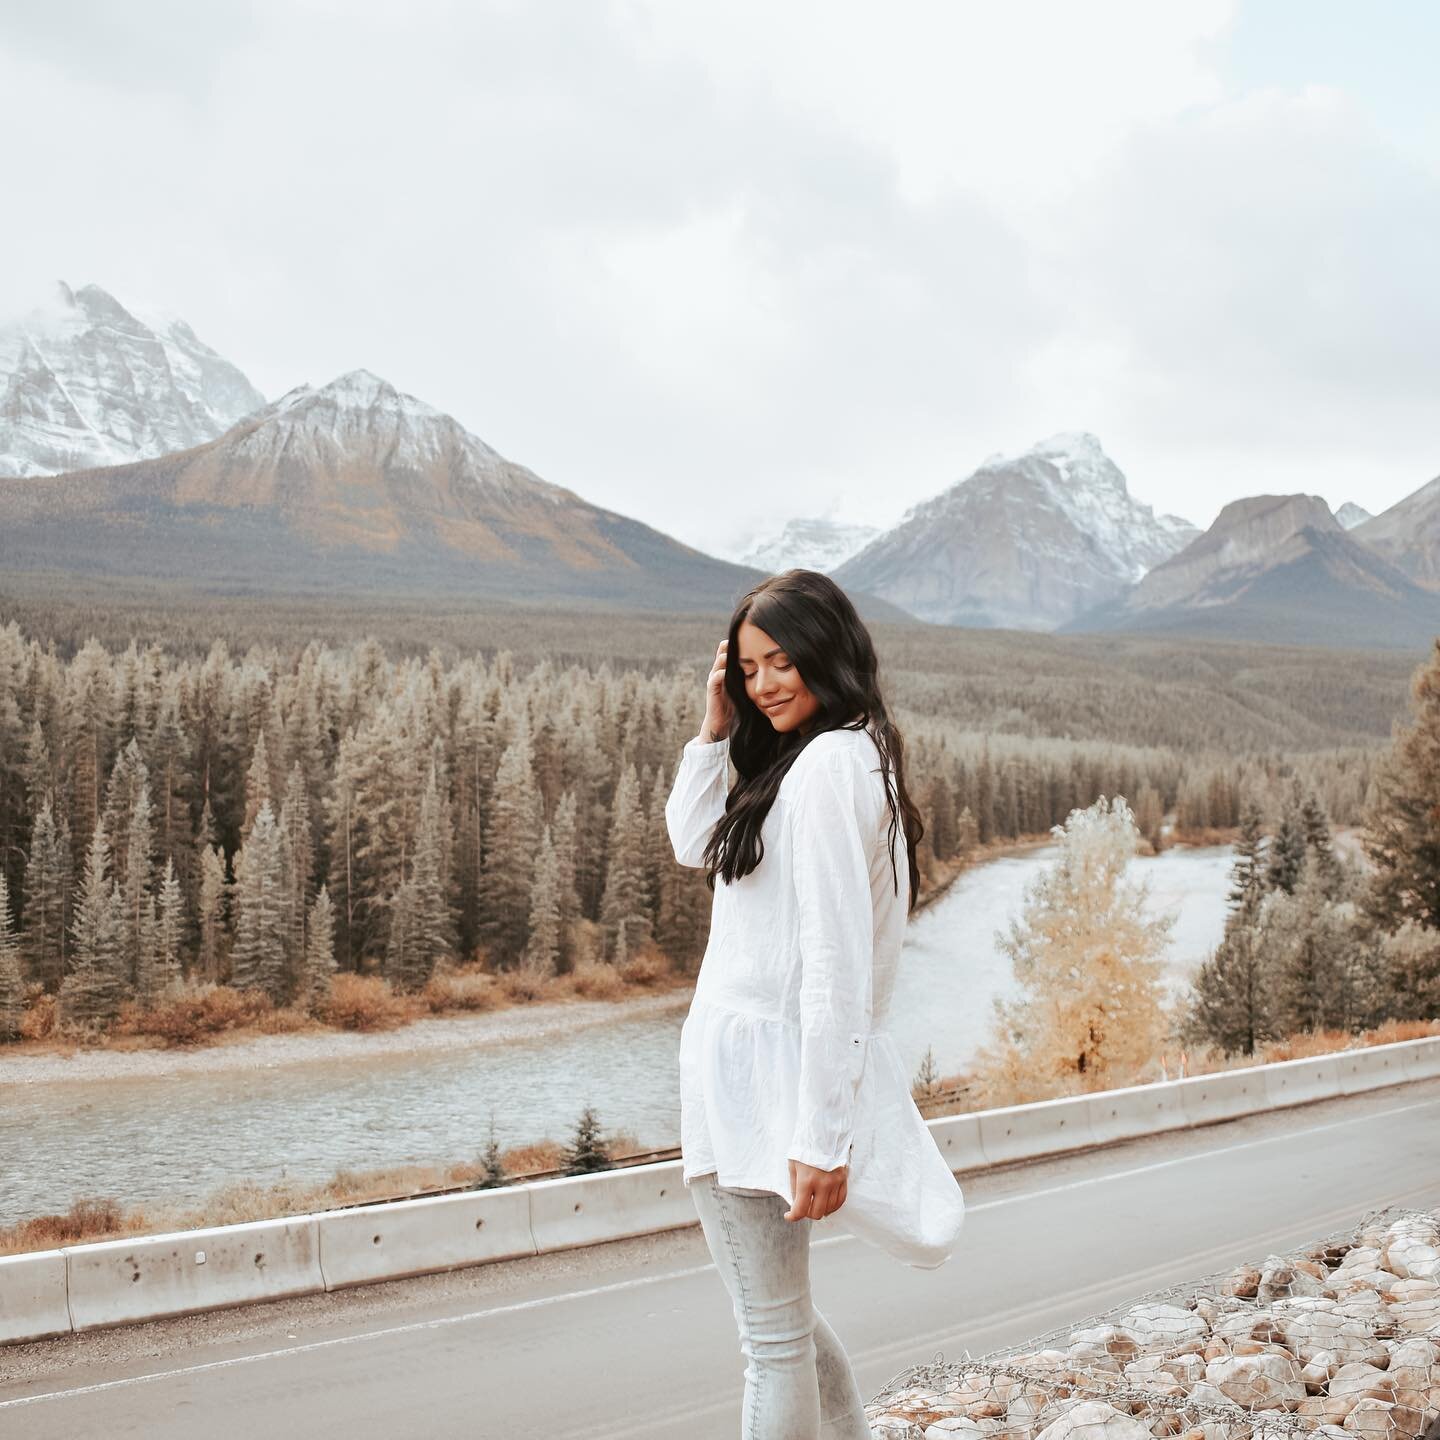 We had an amazing weekend in Lake Louise taking in all the fall feels 🍂 I really don&rsquo;t know which season I enjoy most in the Rockies - which is your favourite season? 
&bull;
A whole blog post about our experience at @lakelouiseinn is coming t